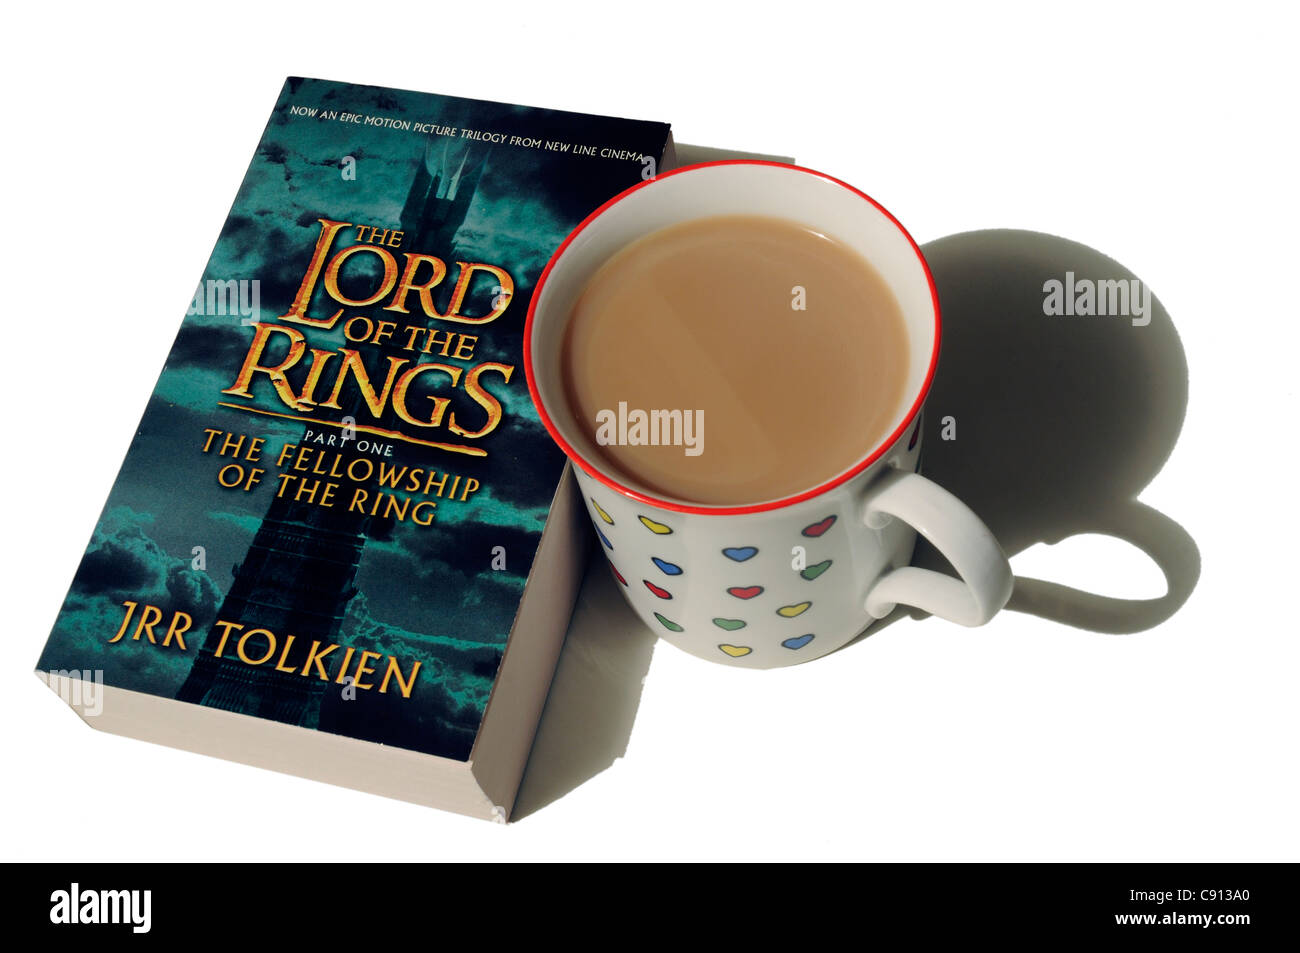 The Lord of the Rings by JRR Tolkein Stock Photo